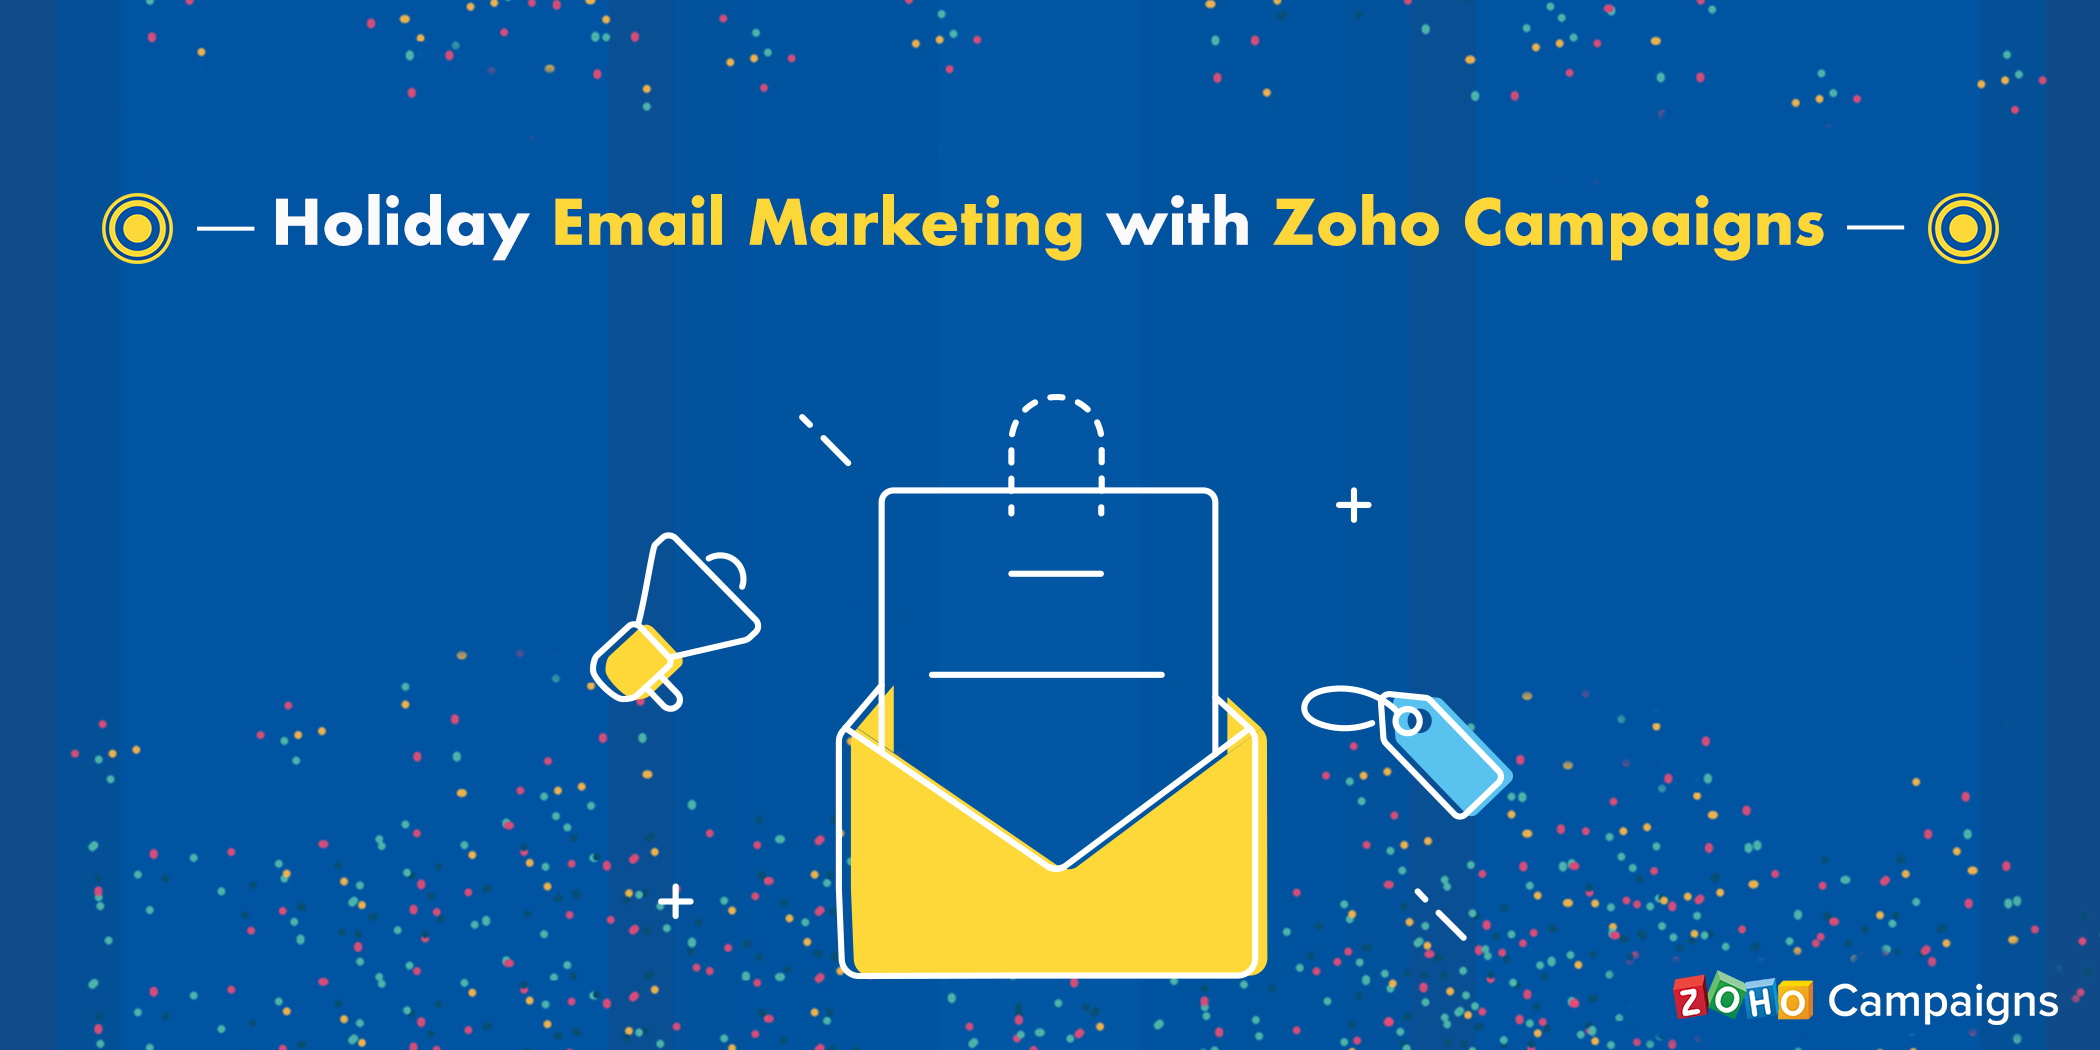 How to plan your holiday email marketing before going on a vacation